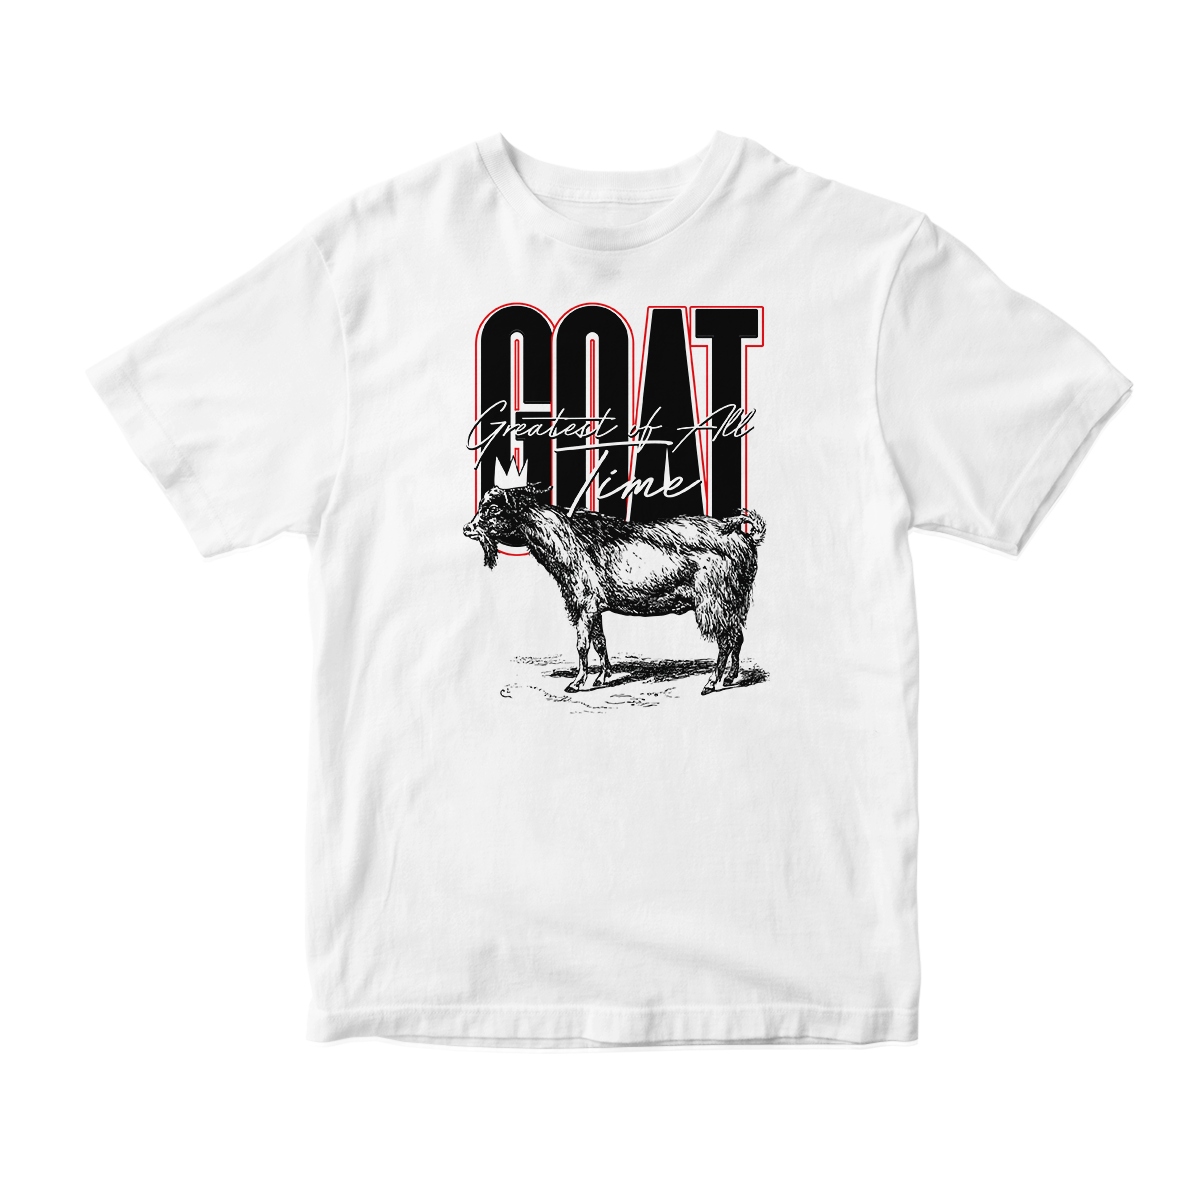 'Crown Goat' in Reverse He Got Game CW Short Sleeve Tee